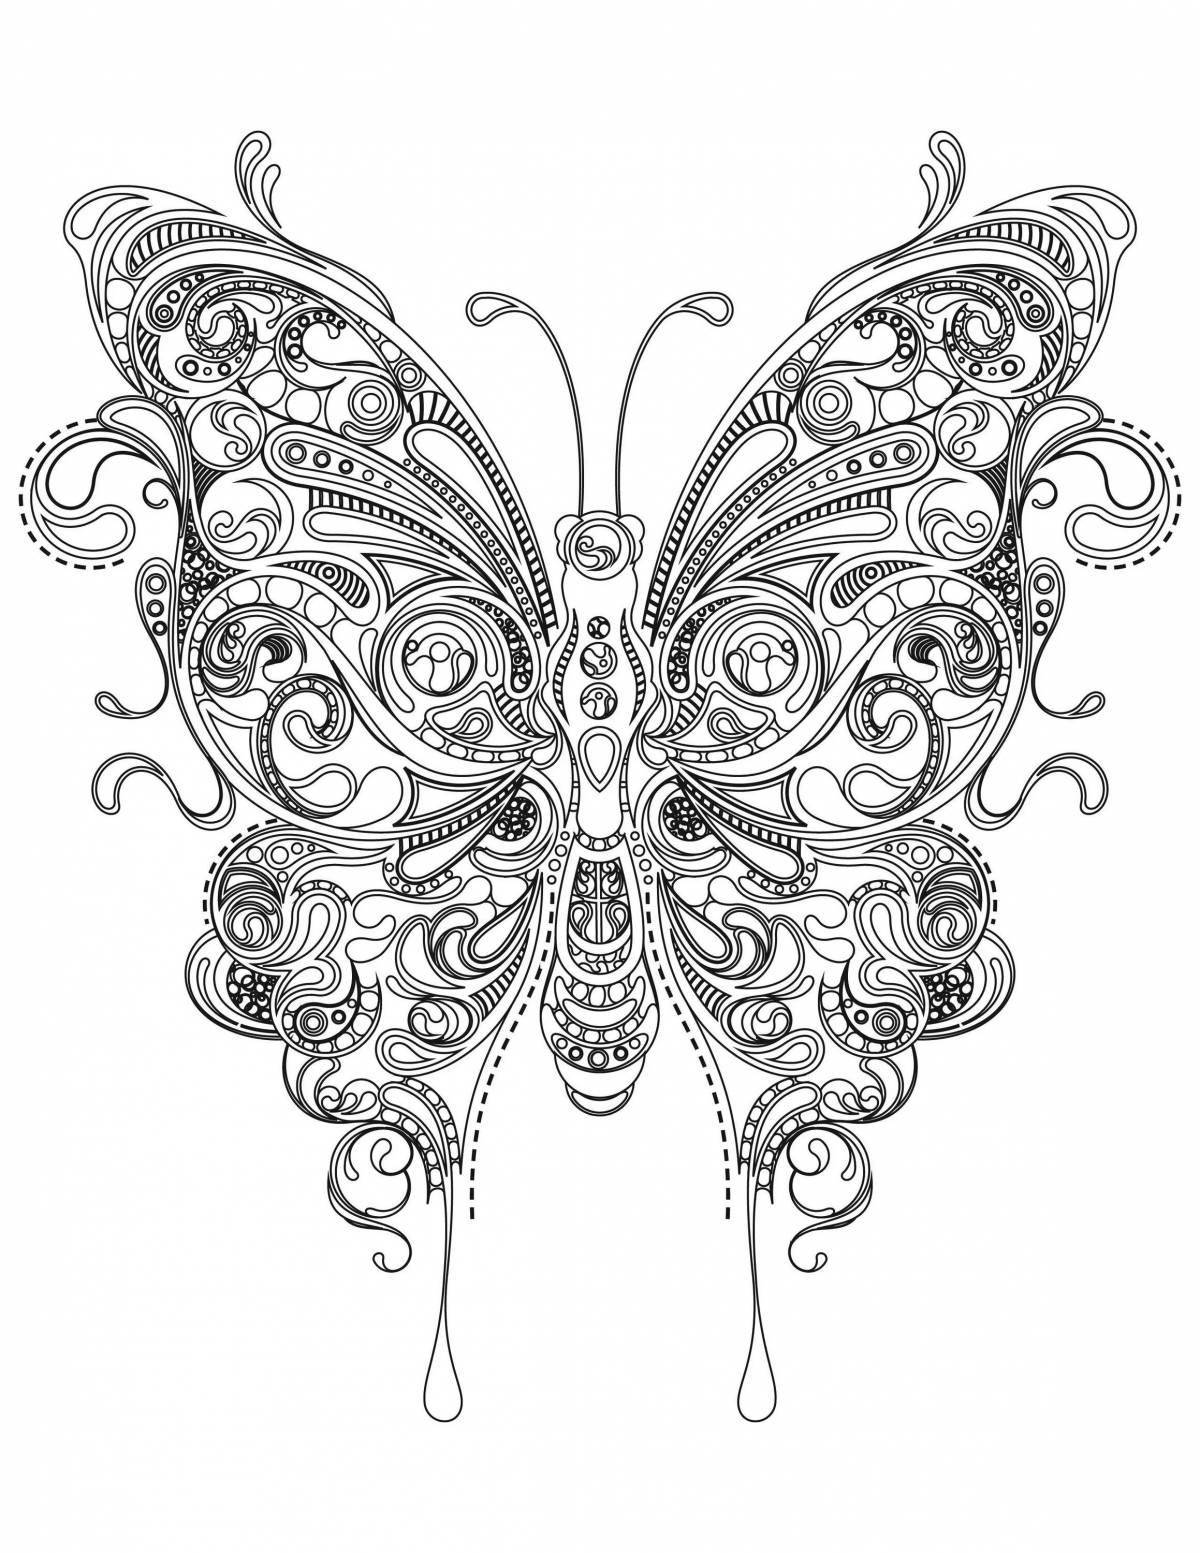 Exquisite pattern coloring book